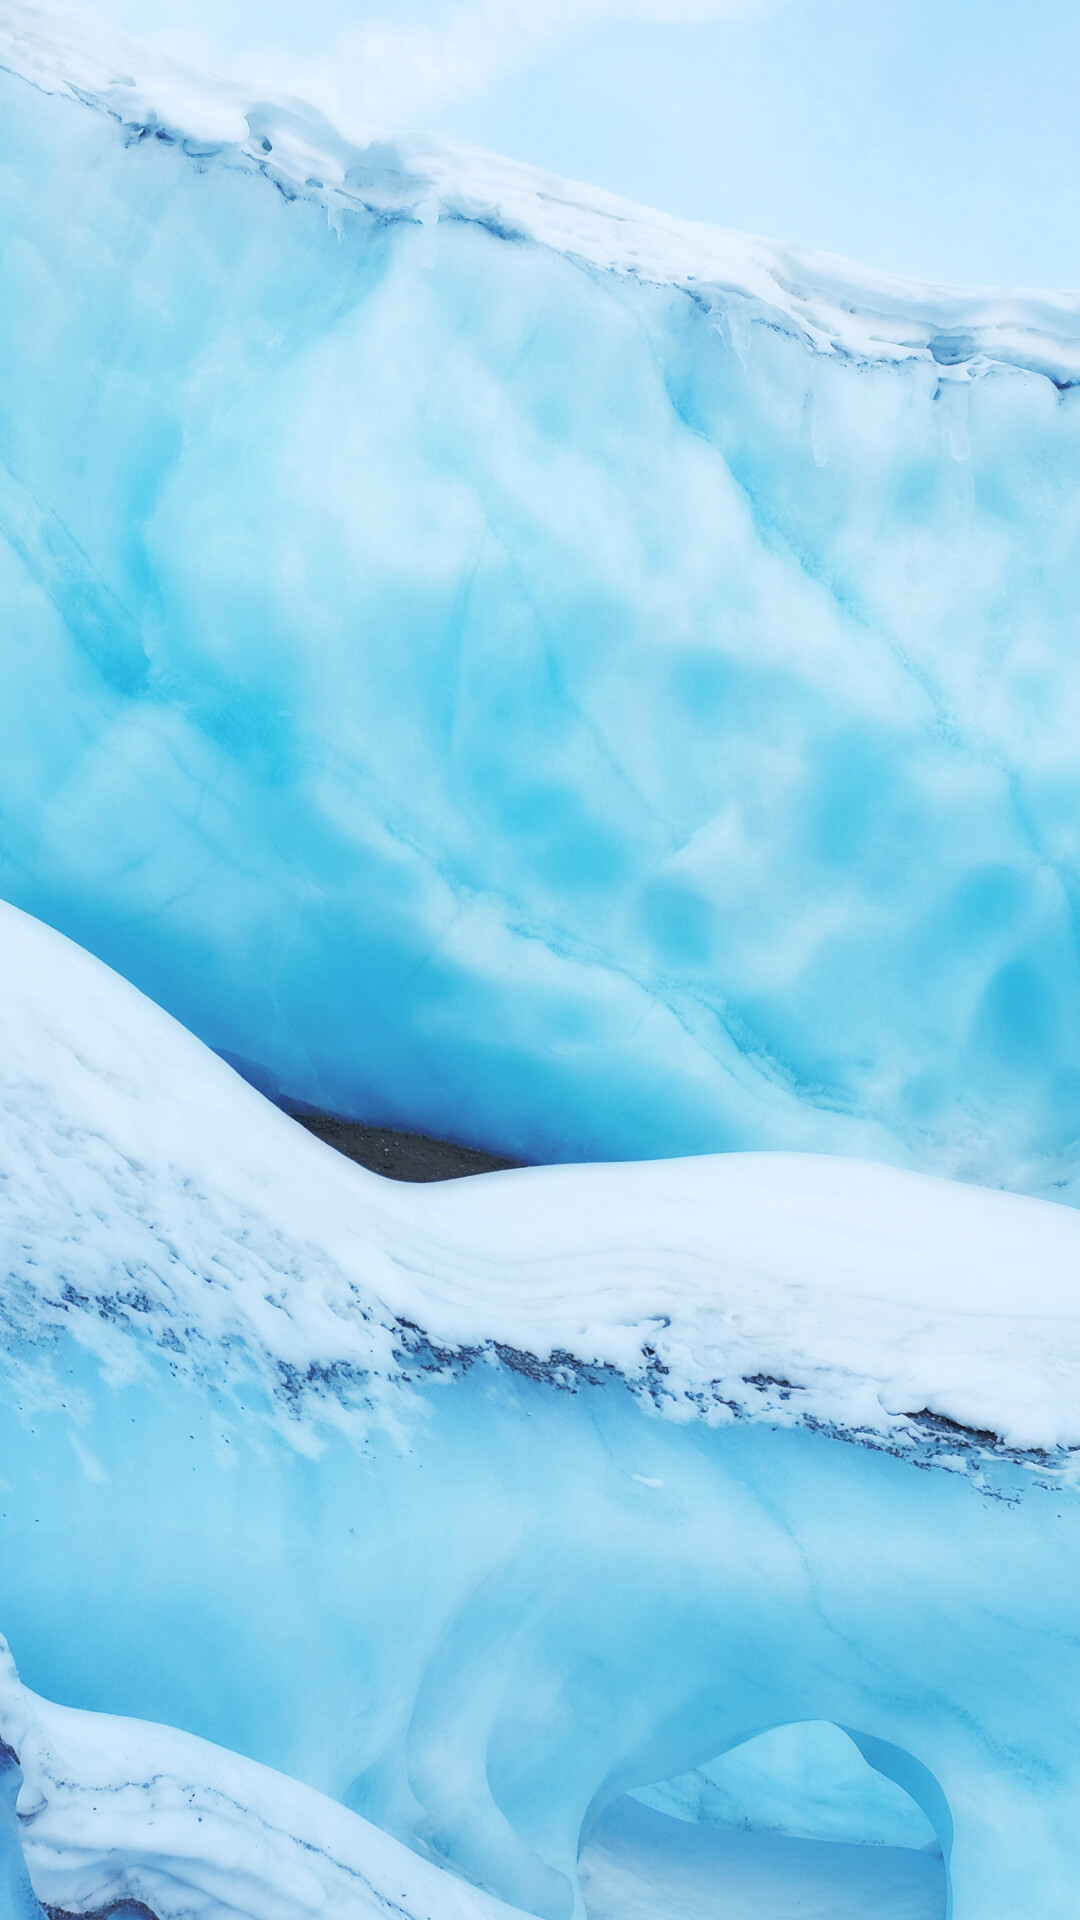 Glacier: An ice mass that forms where the accumulation of snow and ice exceeds ablation. 1080x1920 Full HD Wallpaper.